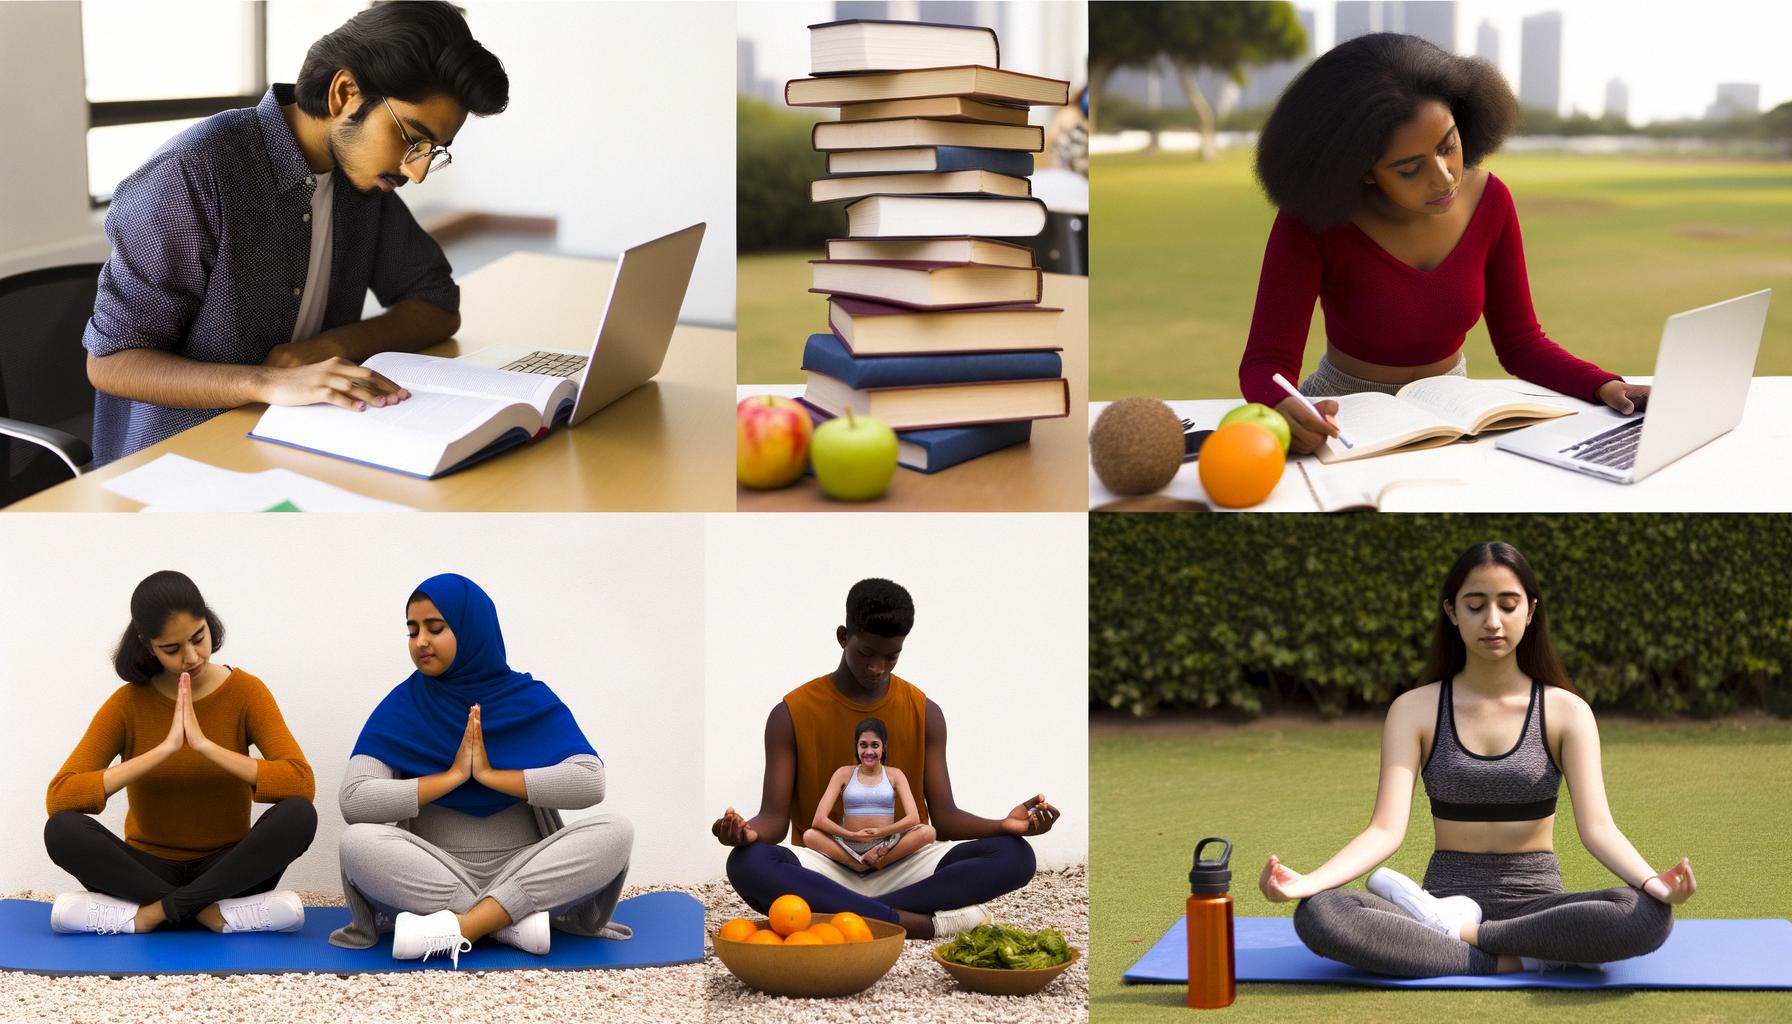 College students balance studies and wellbeing